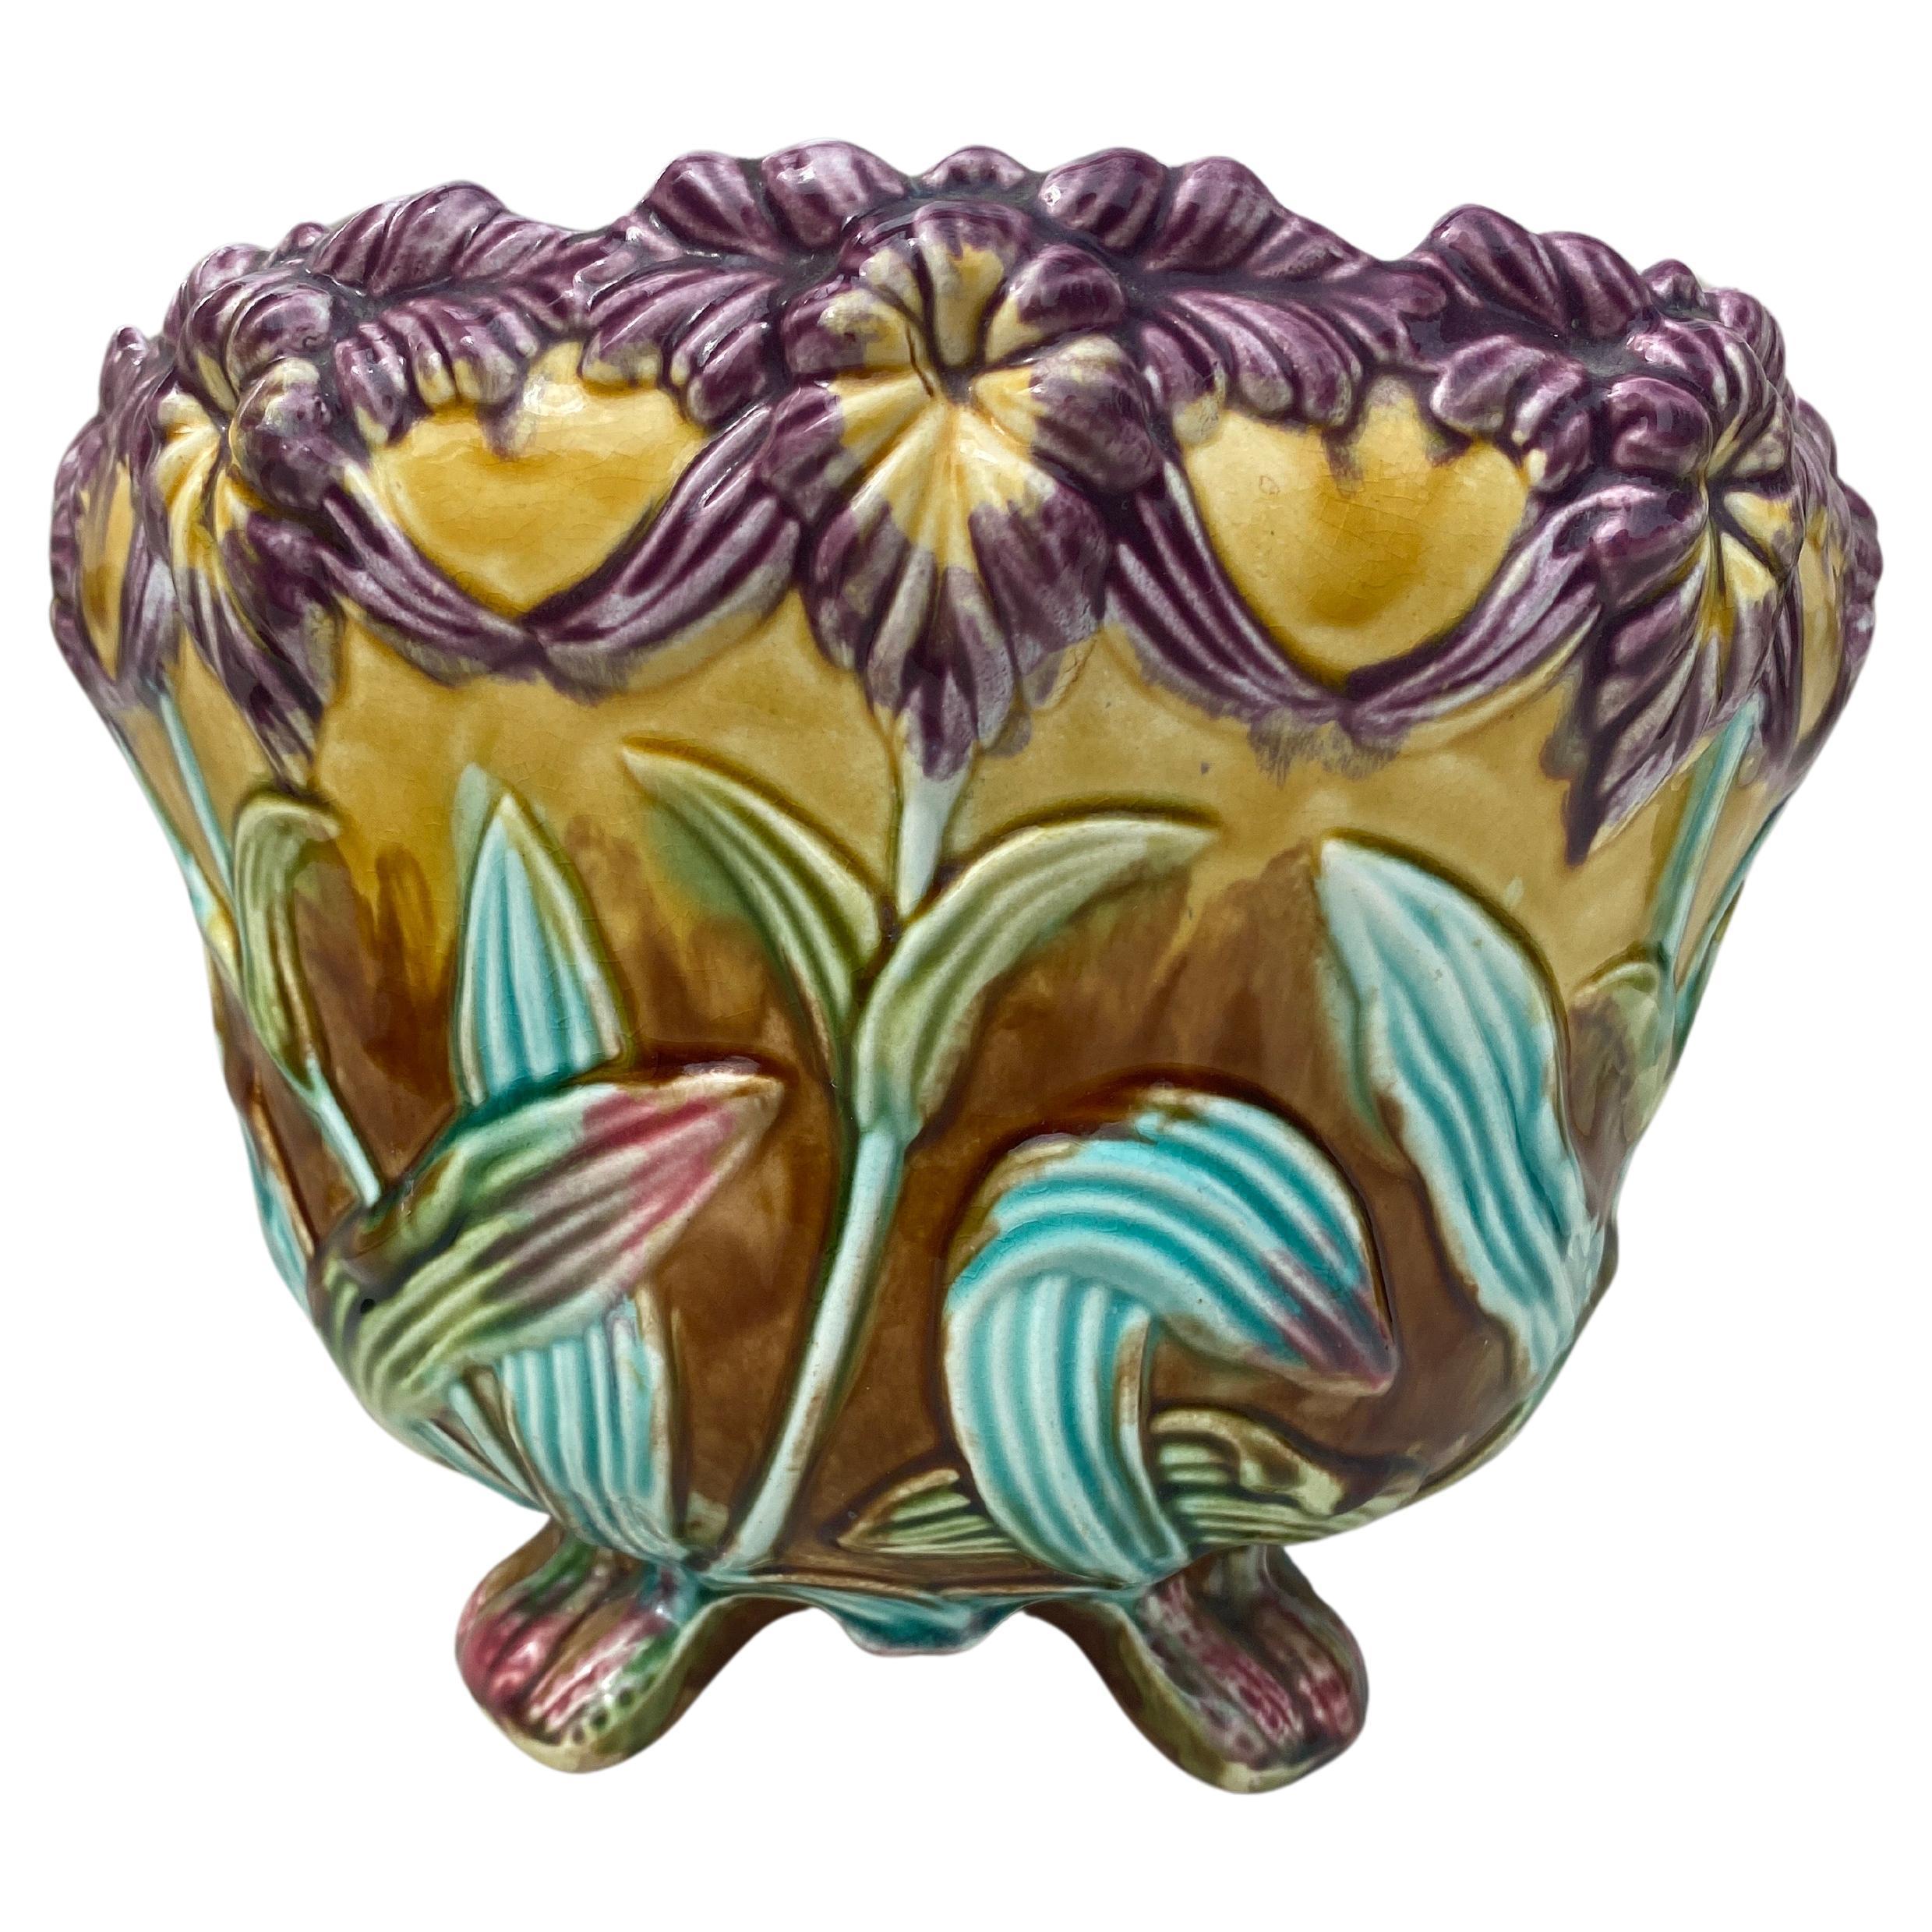 French Majolica Orchid Jardinière Onnaing, circa 1880
Height / 8 inches.
Diameter / 10.5 inches.